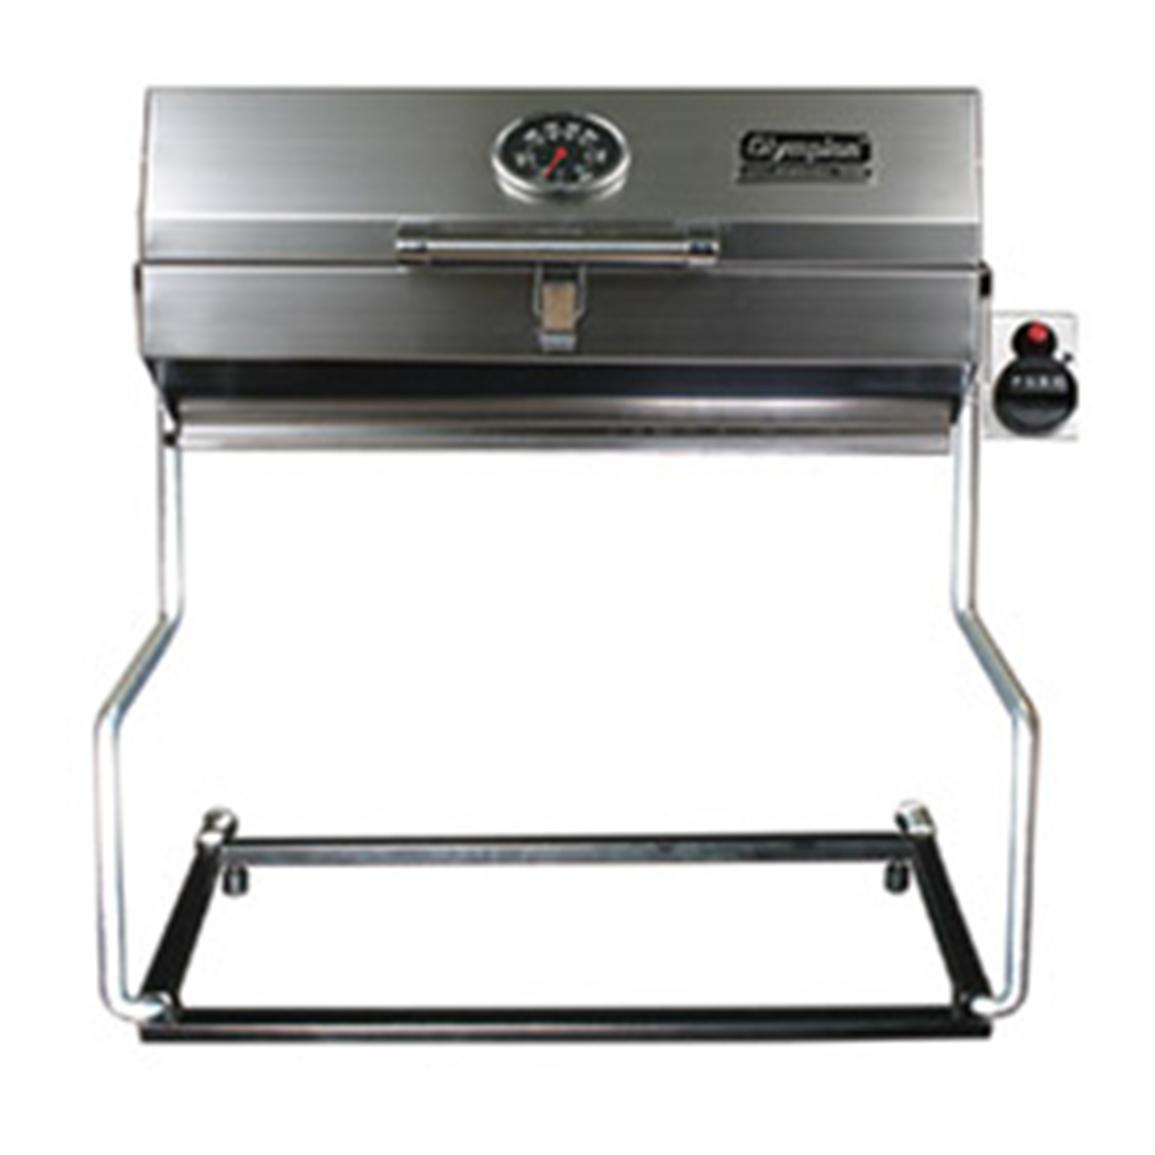 Camco Olympian 5500 Stainless Steel Rv Grill 194962 Grills Smokers At Sportsman S Guide